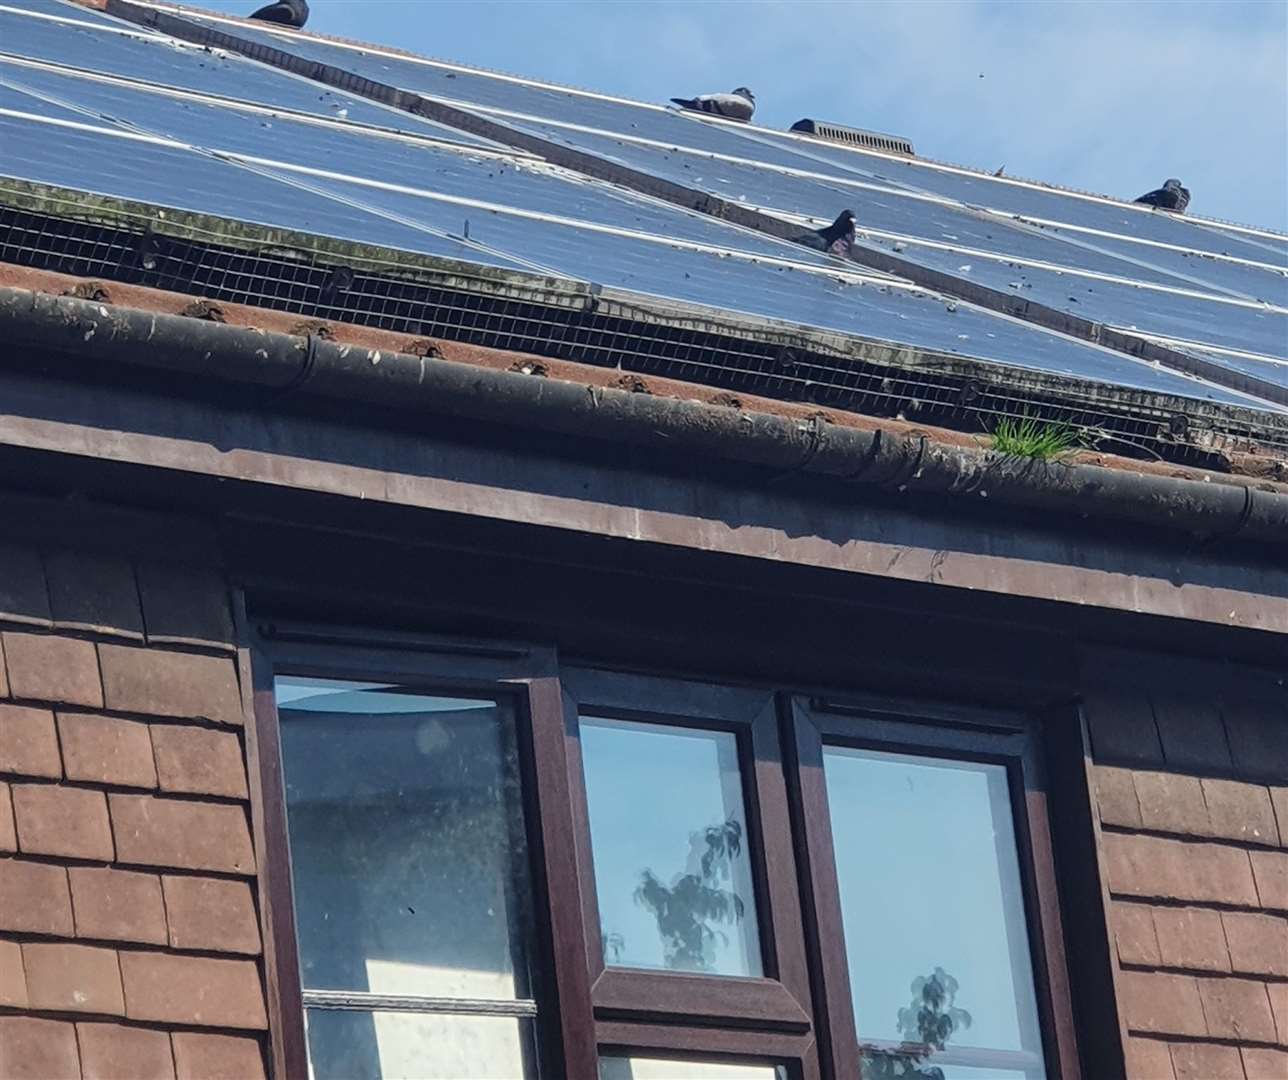 Pigeons on top of roof where they are nesting